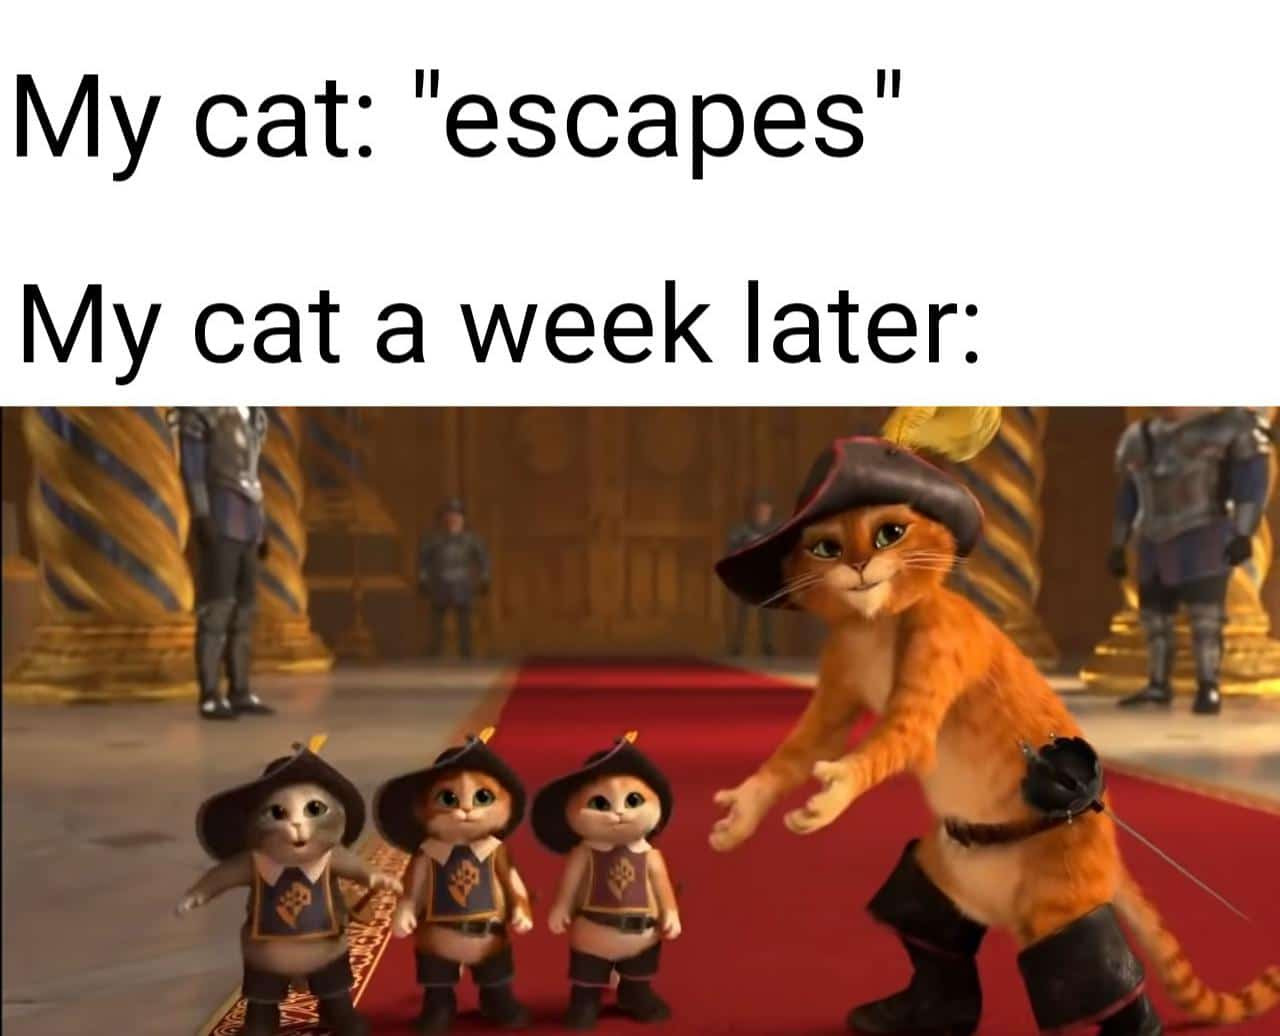 My cat escaping and a week later bringing back 3 babies meme